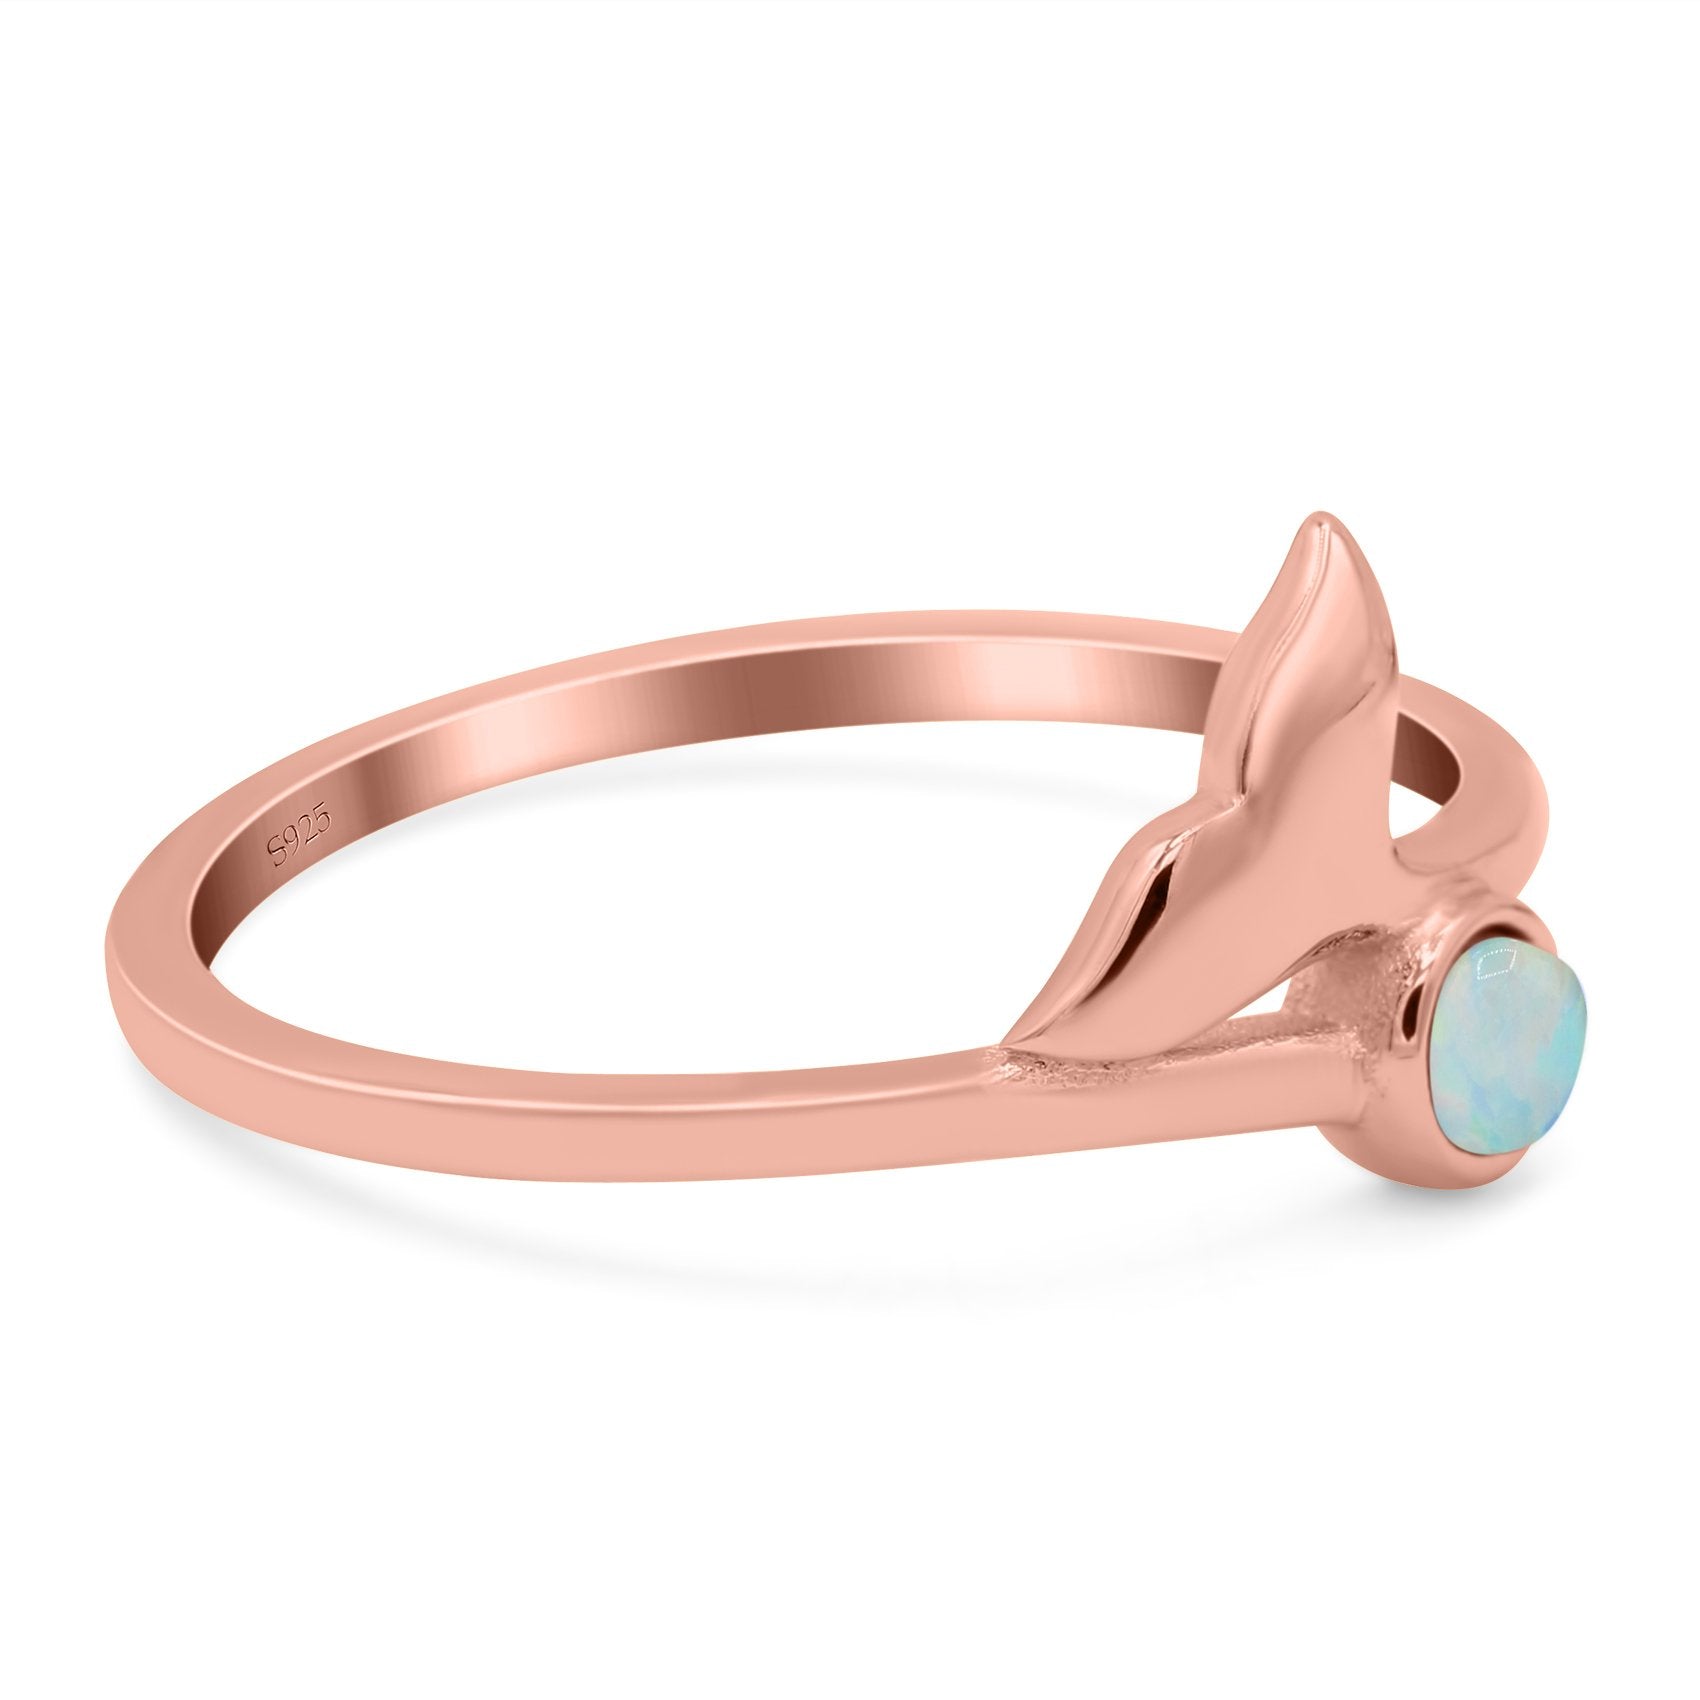 Whale Tail Ring Band Lab Created Opal 925 Sterling Silver (9mm)